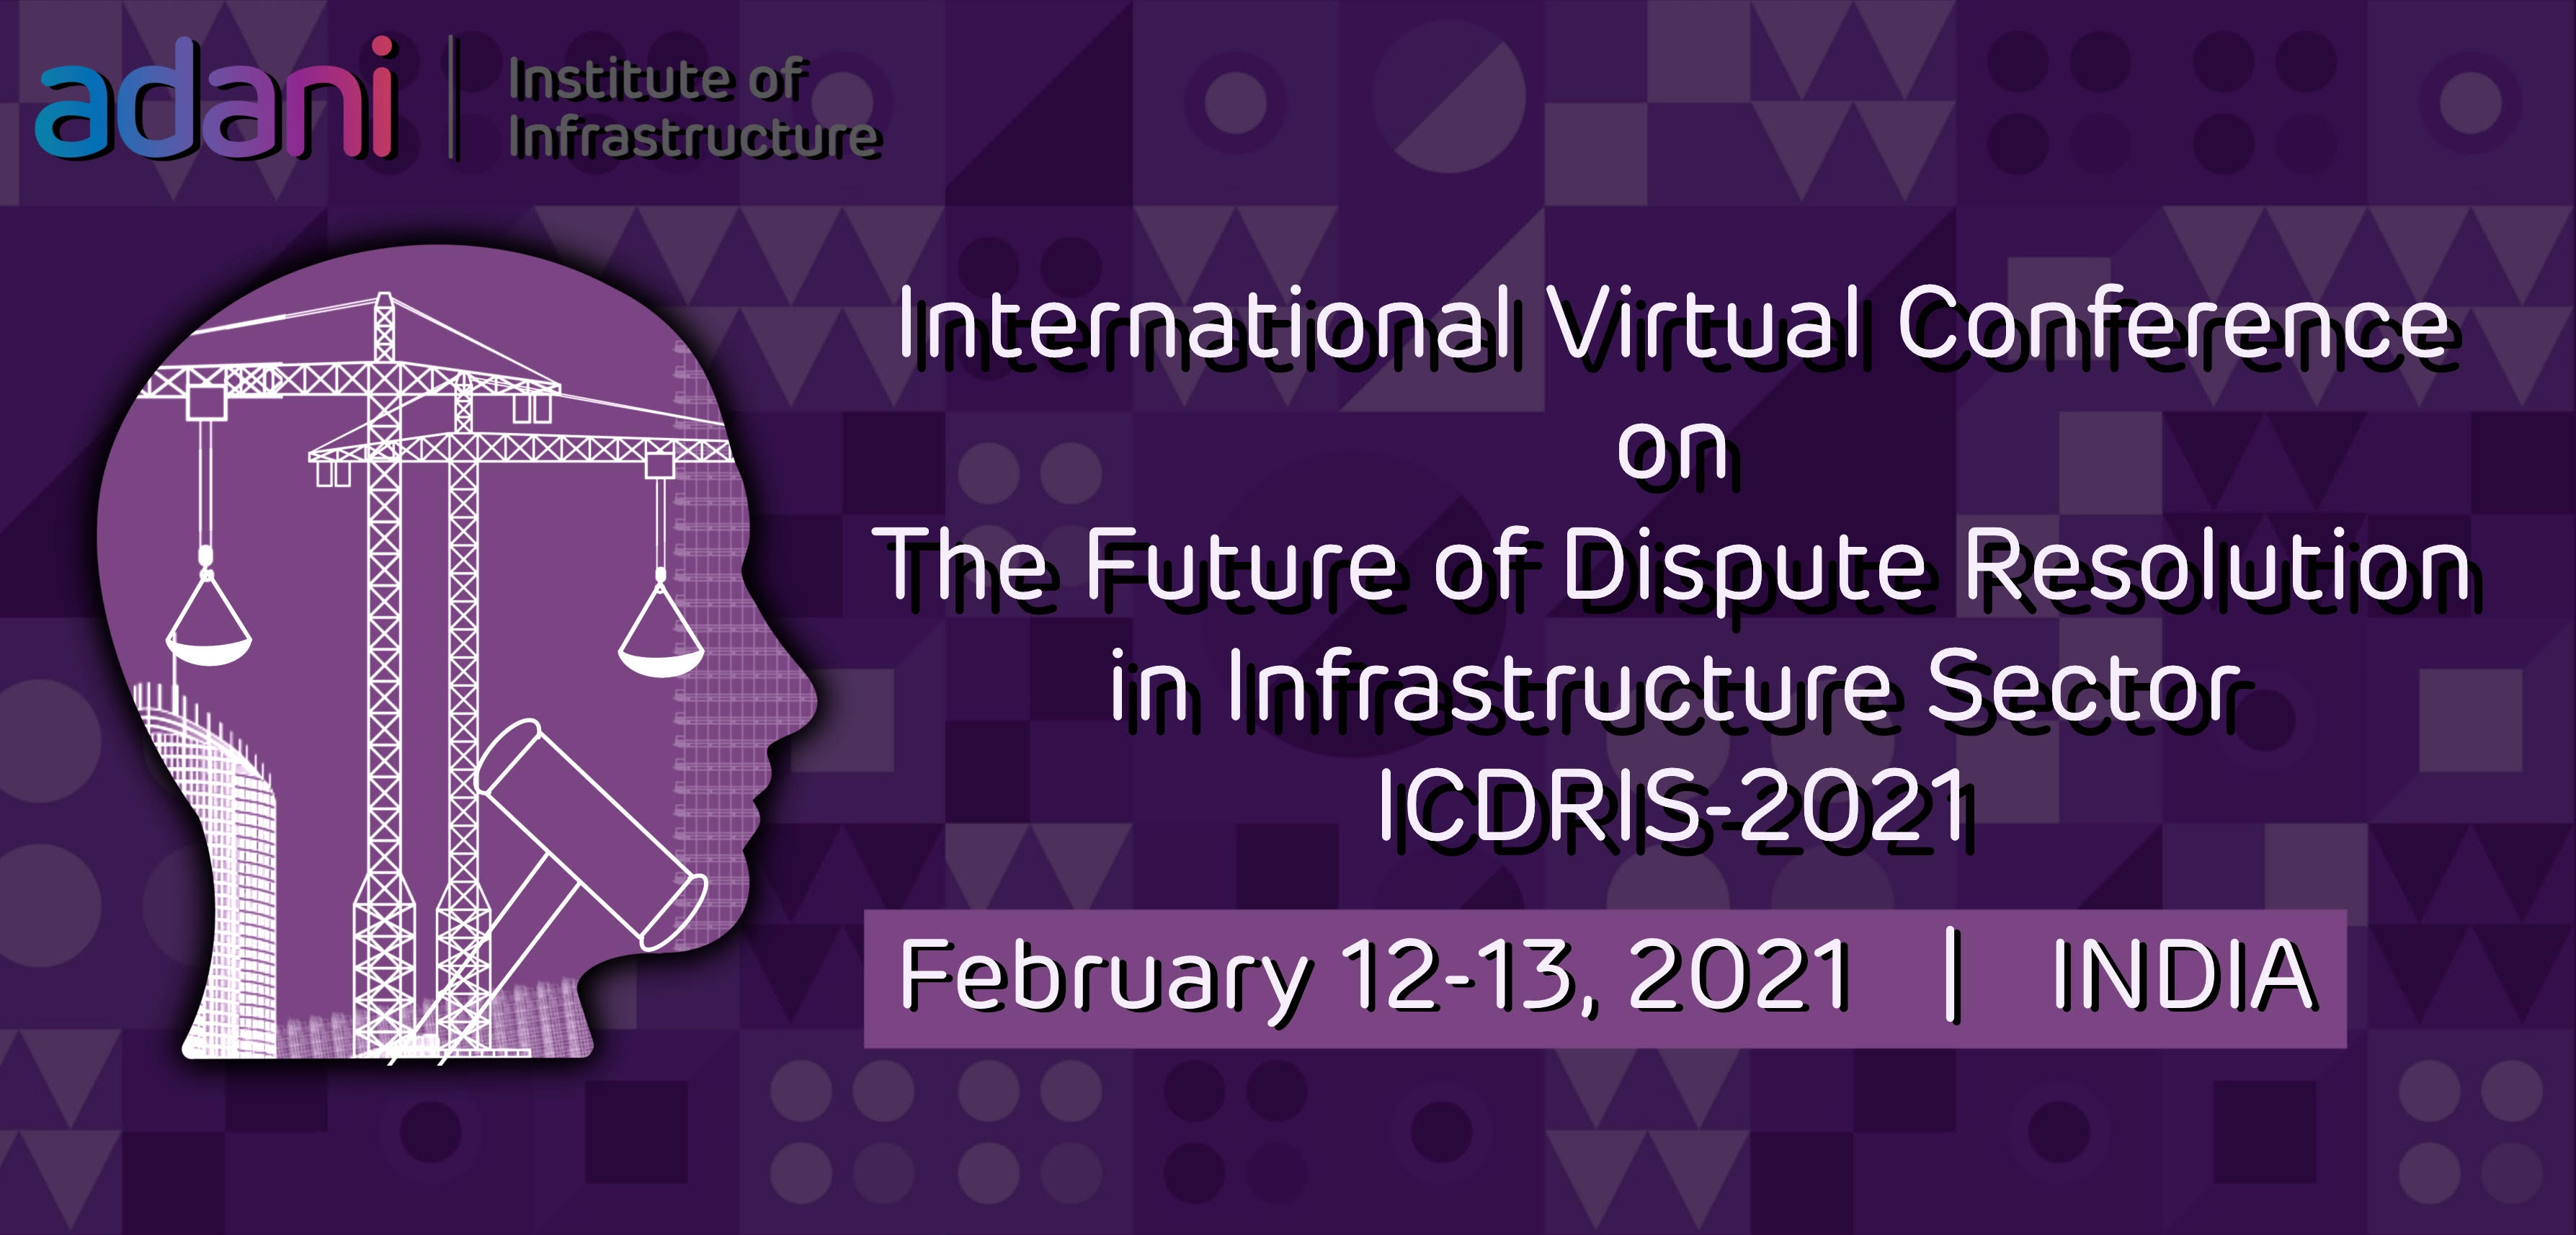 International Virtual Conference on The Future of Dispute Resolution in Infrastructure Sector 2021